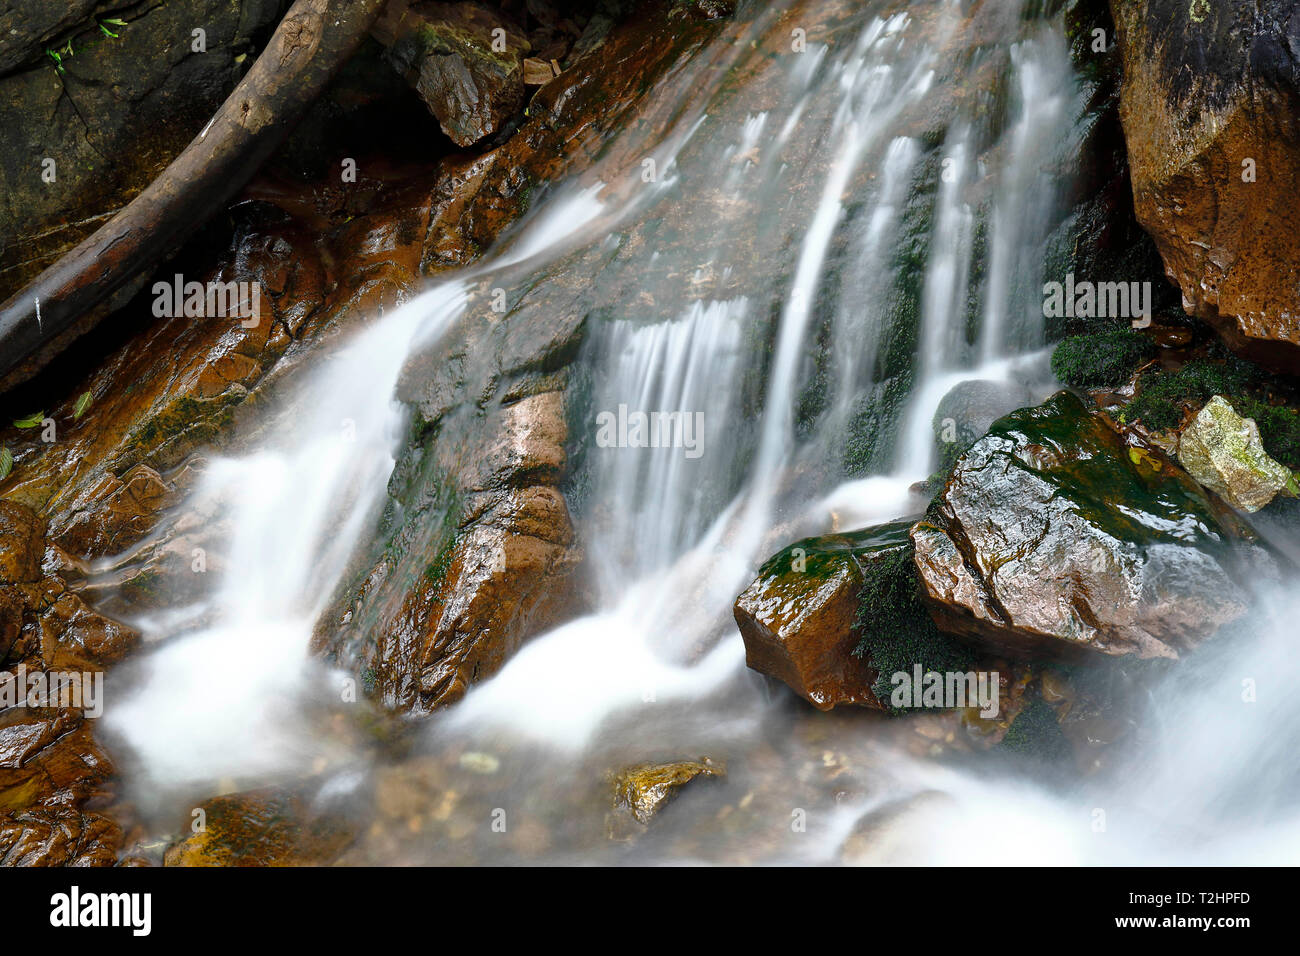 Beautiful natural water fall into the interior of andean forest in a stream called Miraflores located in the mountains. Stock Photo